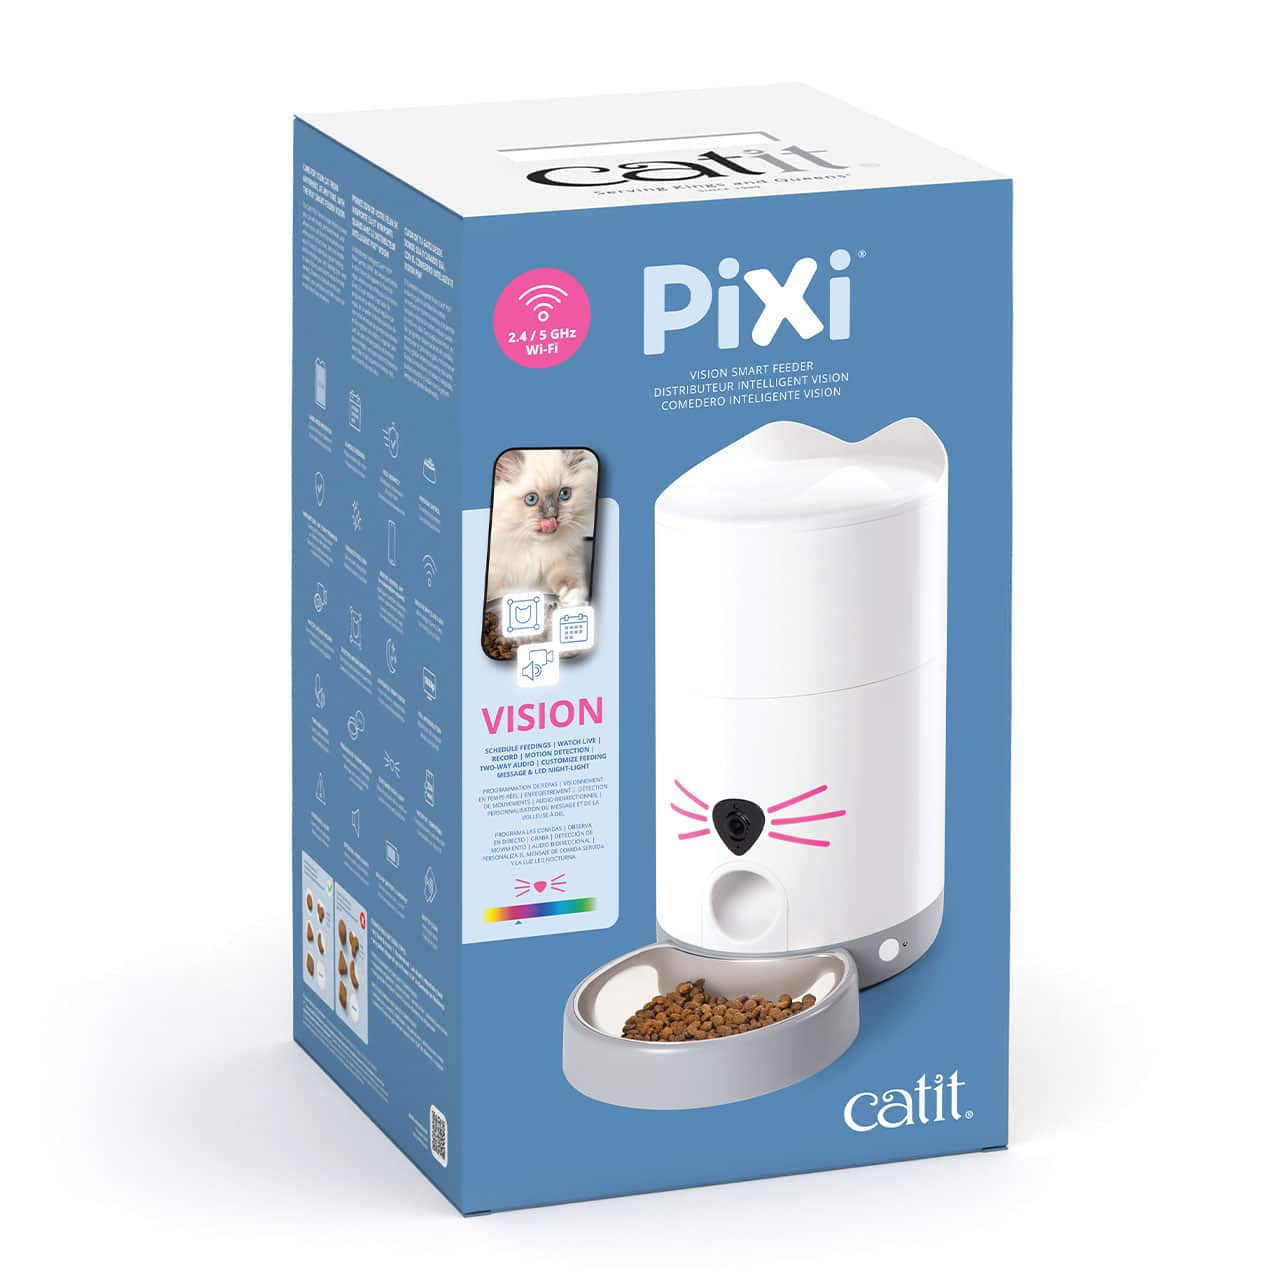 Package of the Catit PIXI Vision Smart Feeder